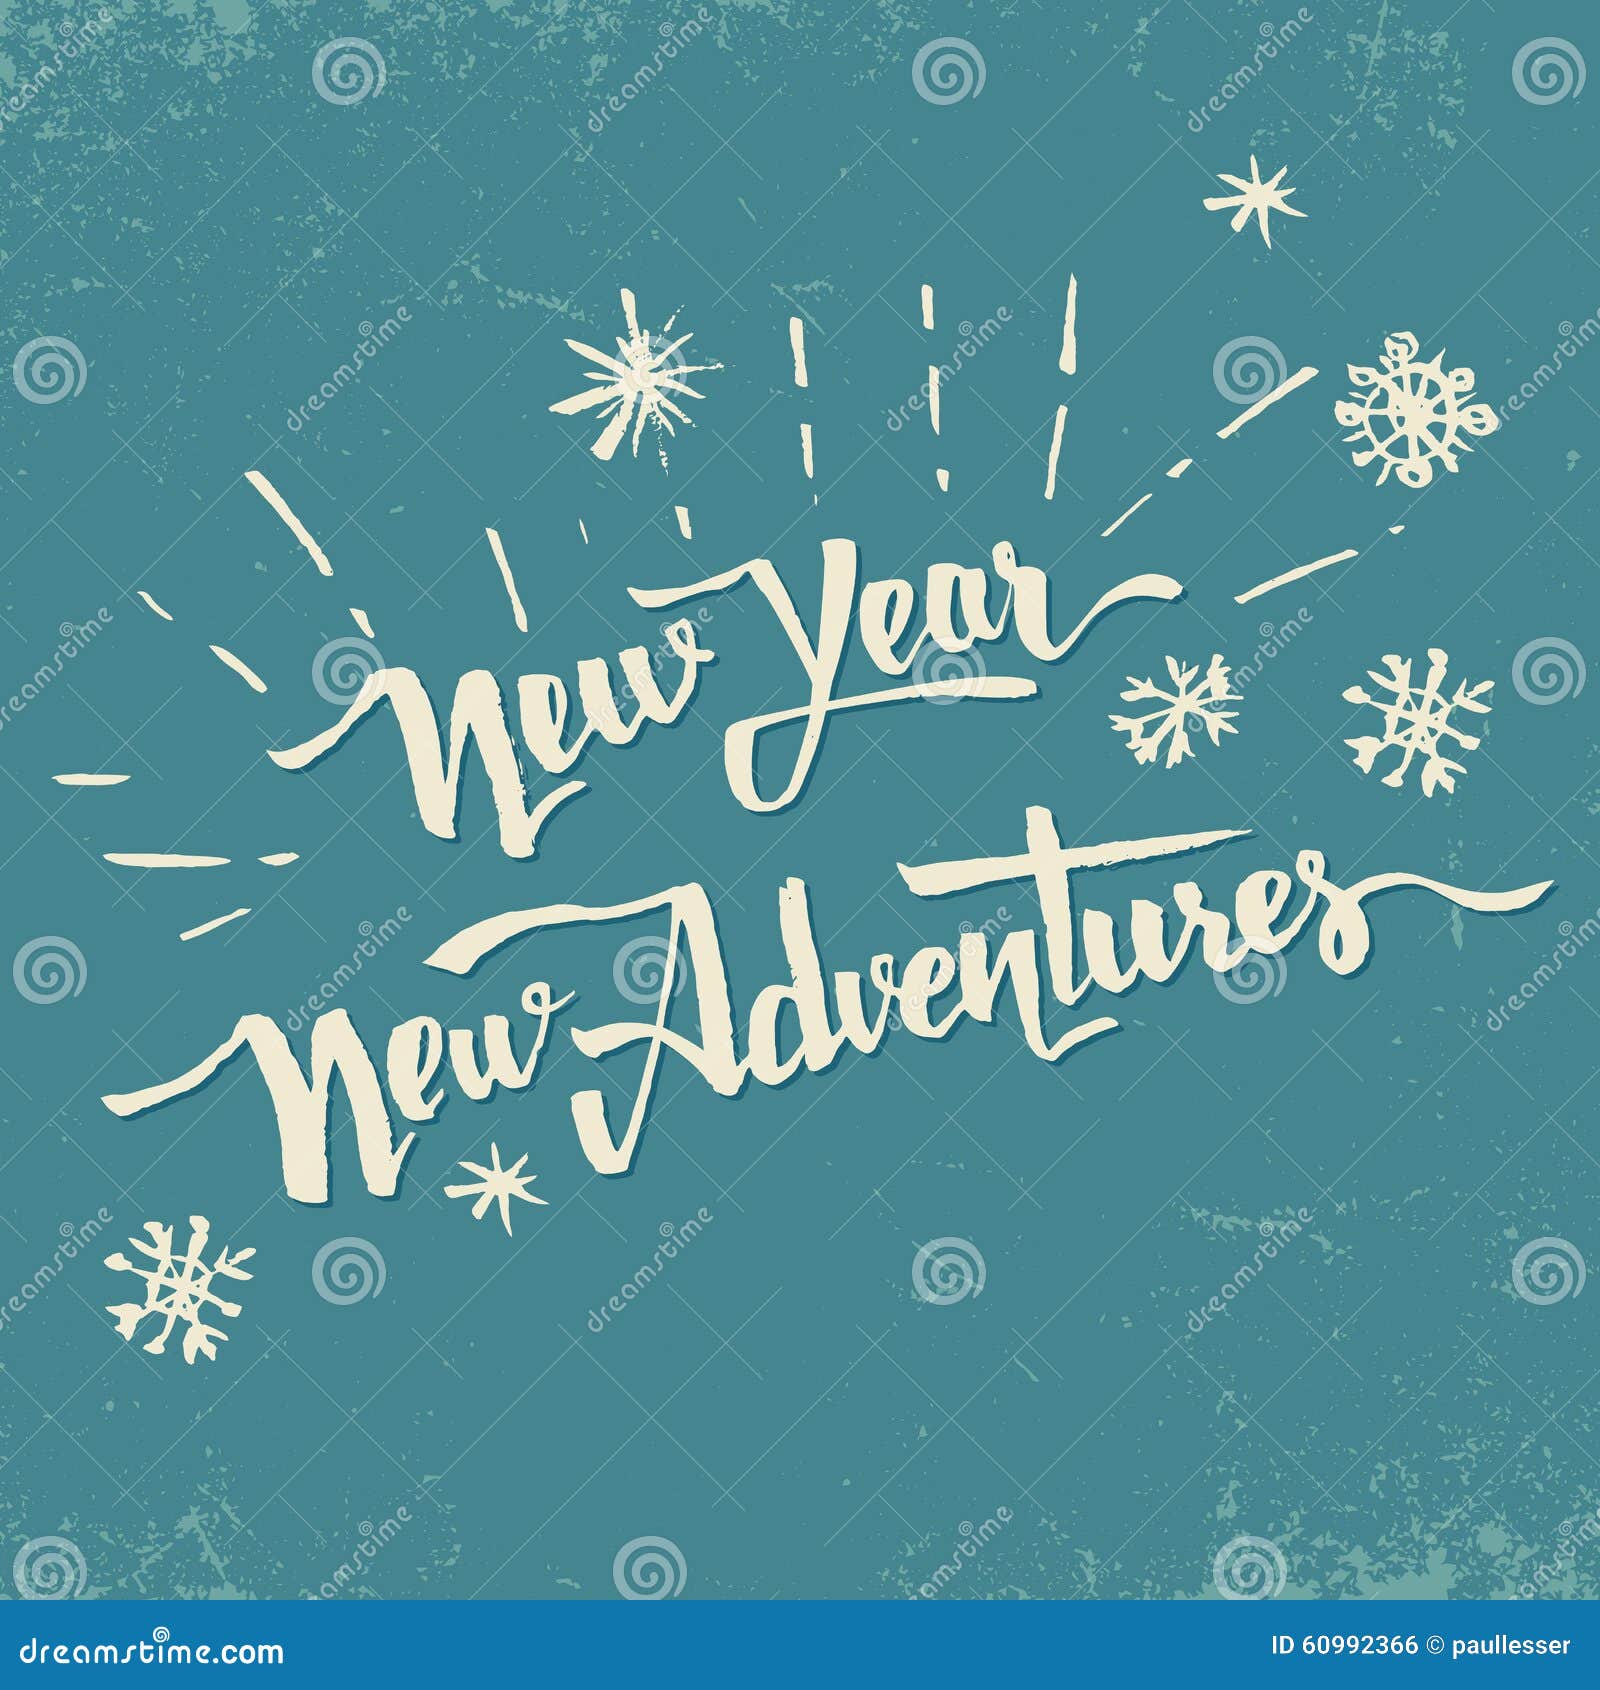 New Year New Adventures Hand Drawn Lettering Stock Vector 